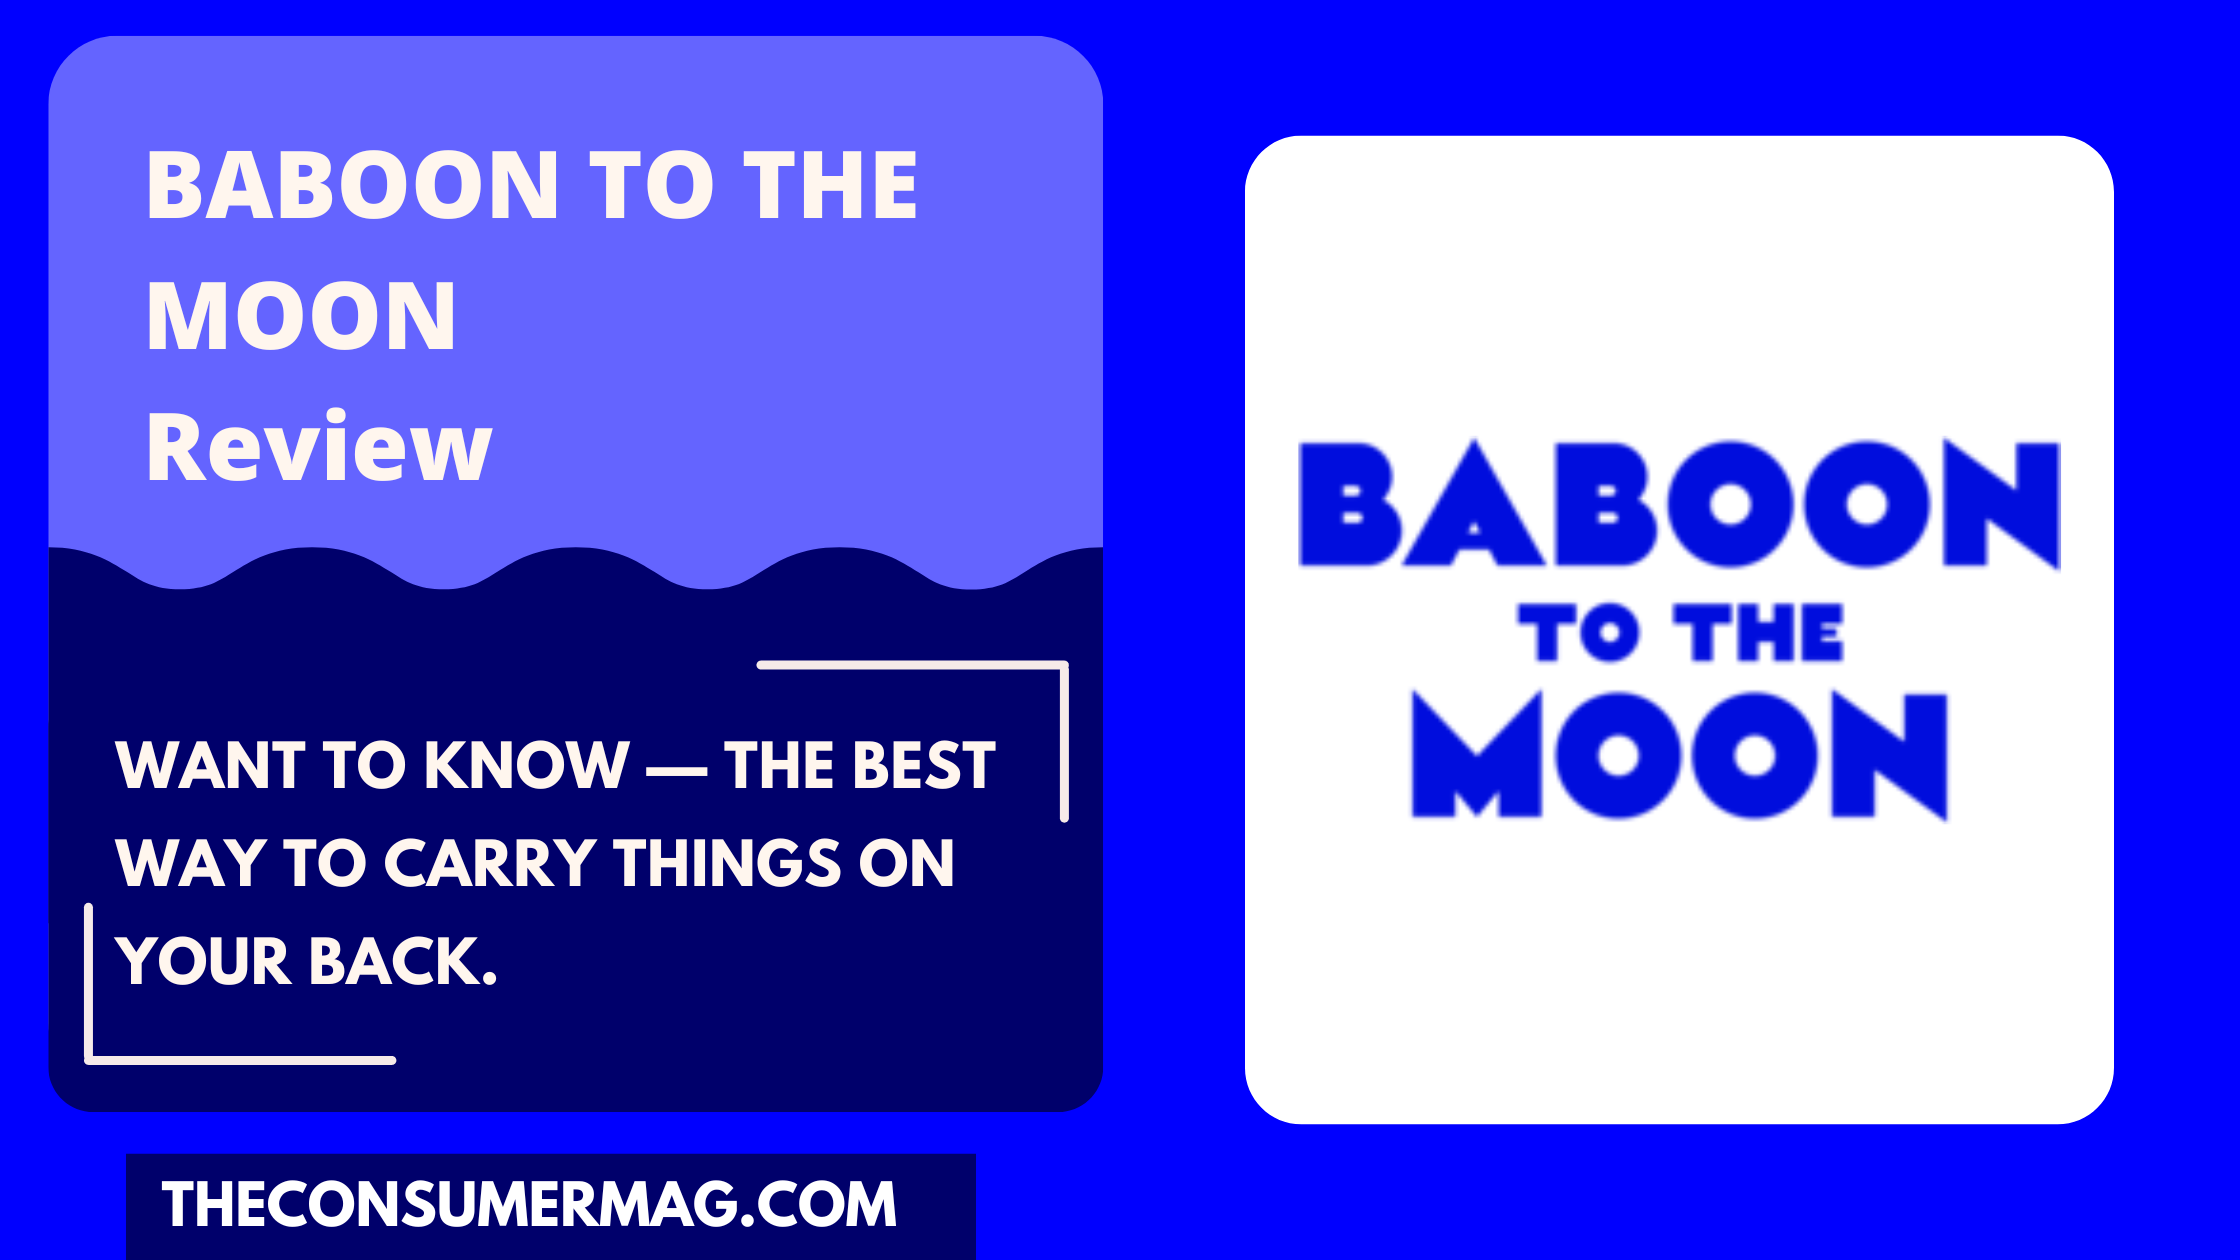 Baboon to the Moon featured image